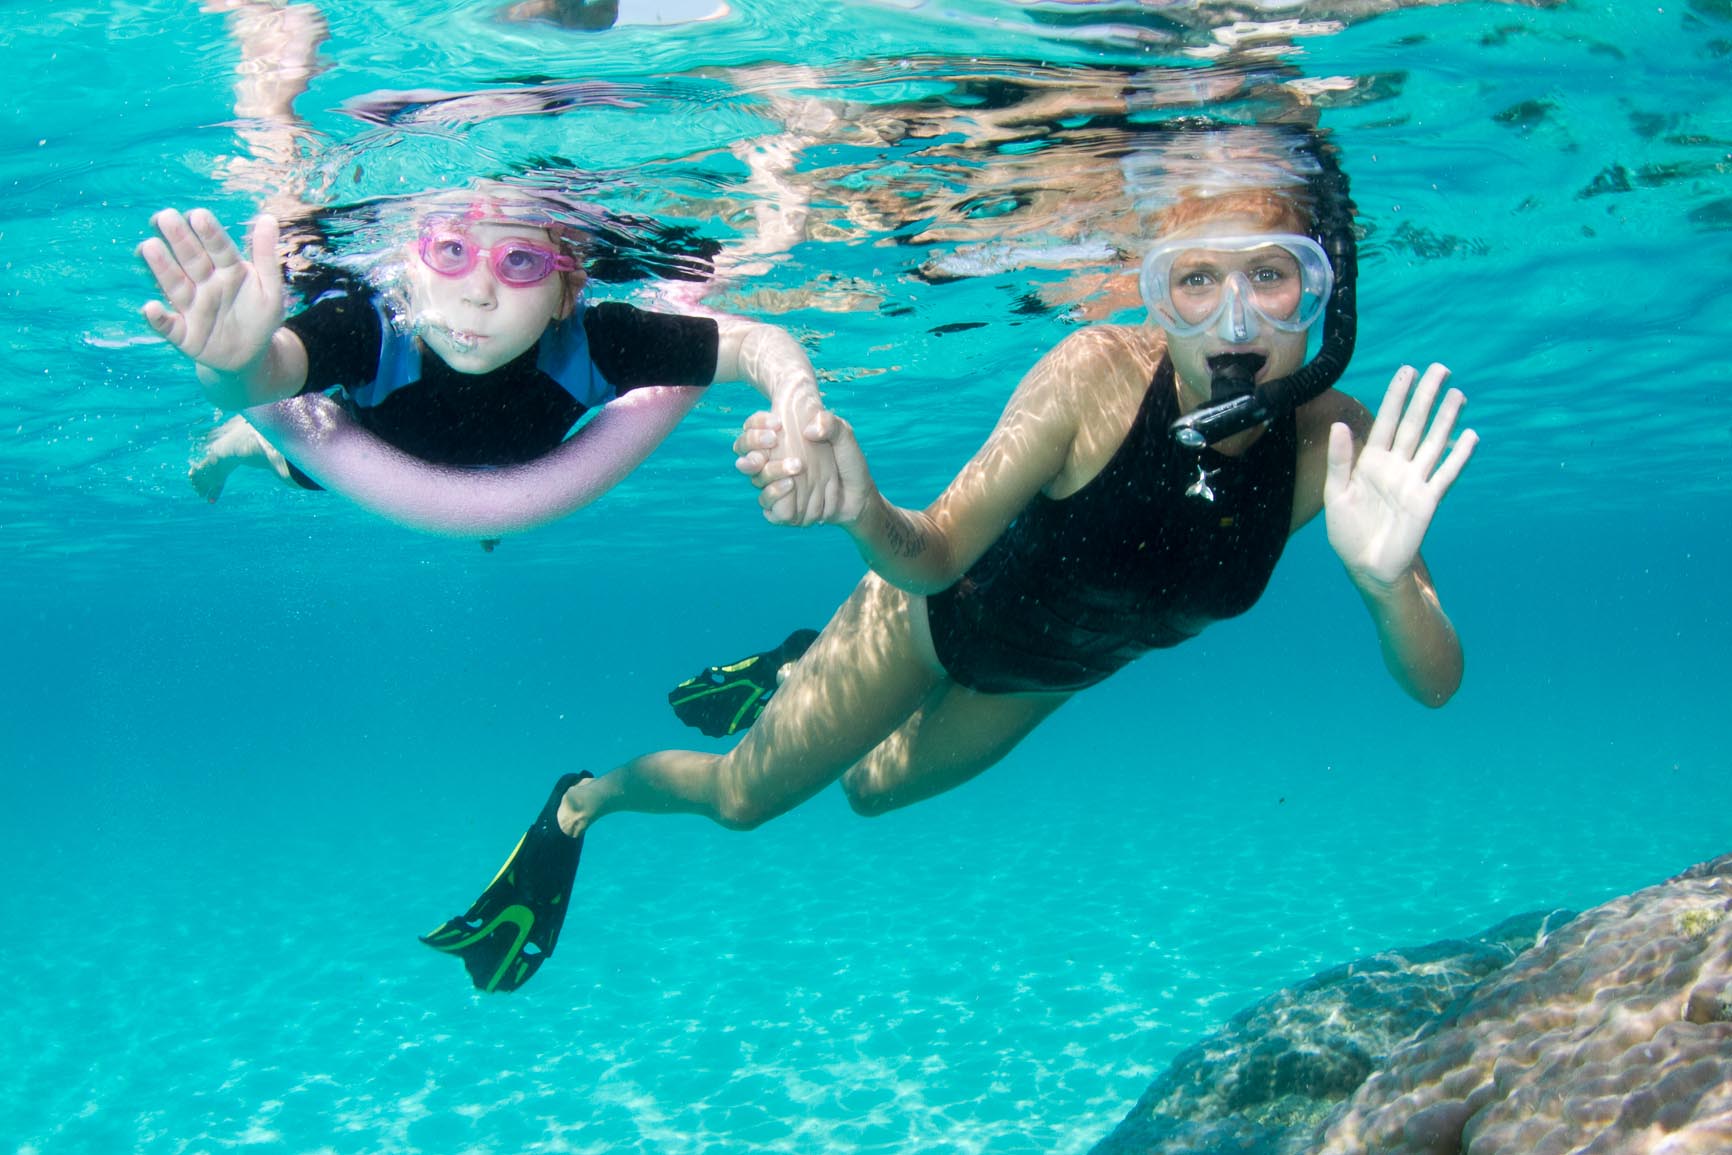 Coral Viewing & Snorkelling Tour, Exmouth 2 HOUR